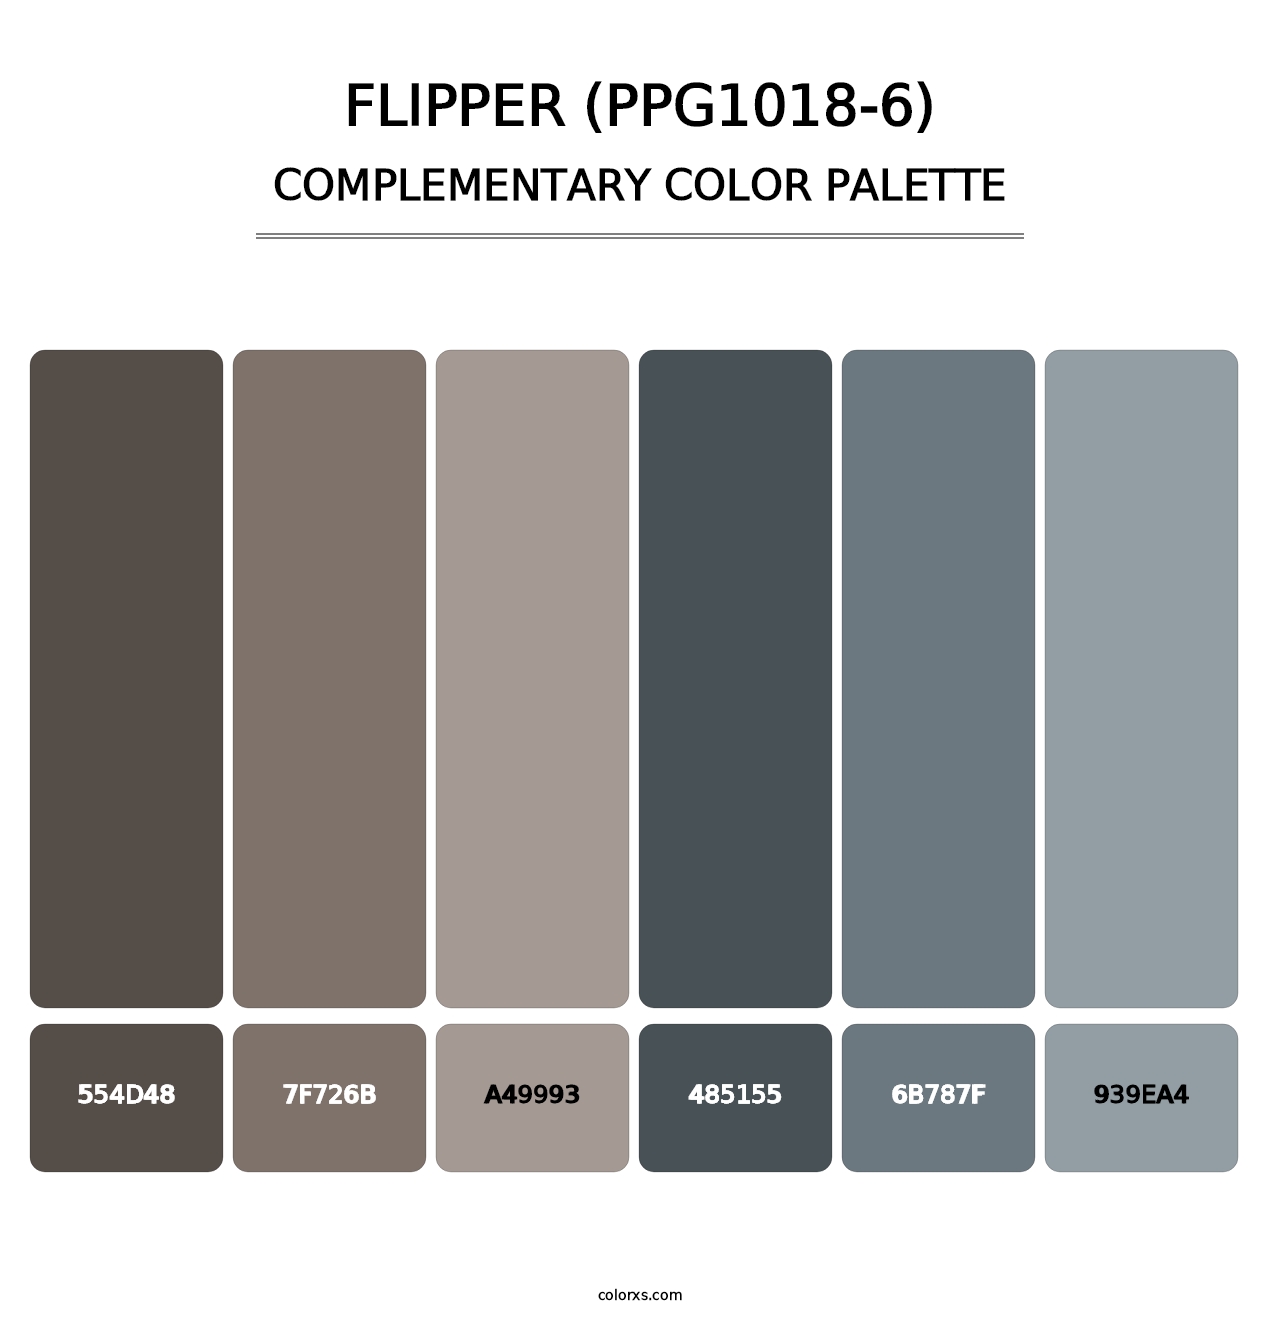 Flipper (PPG1018-6) - Complementary Color Palette